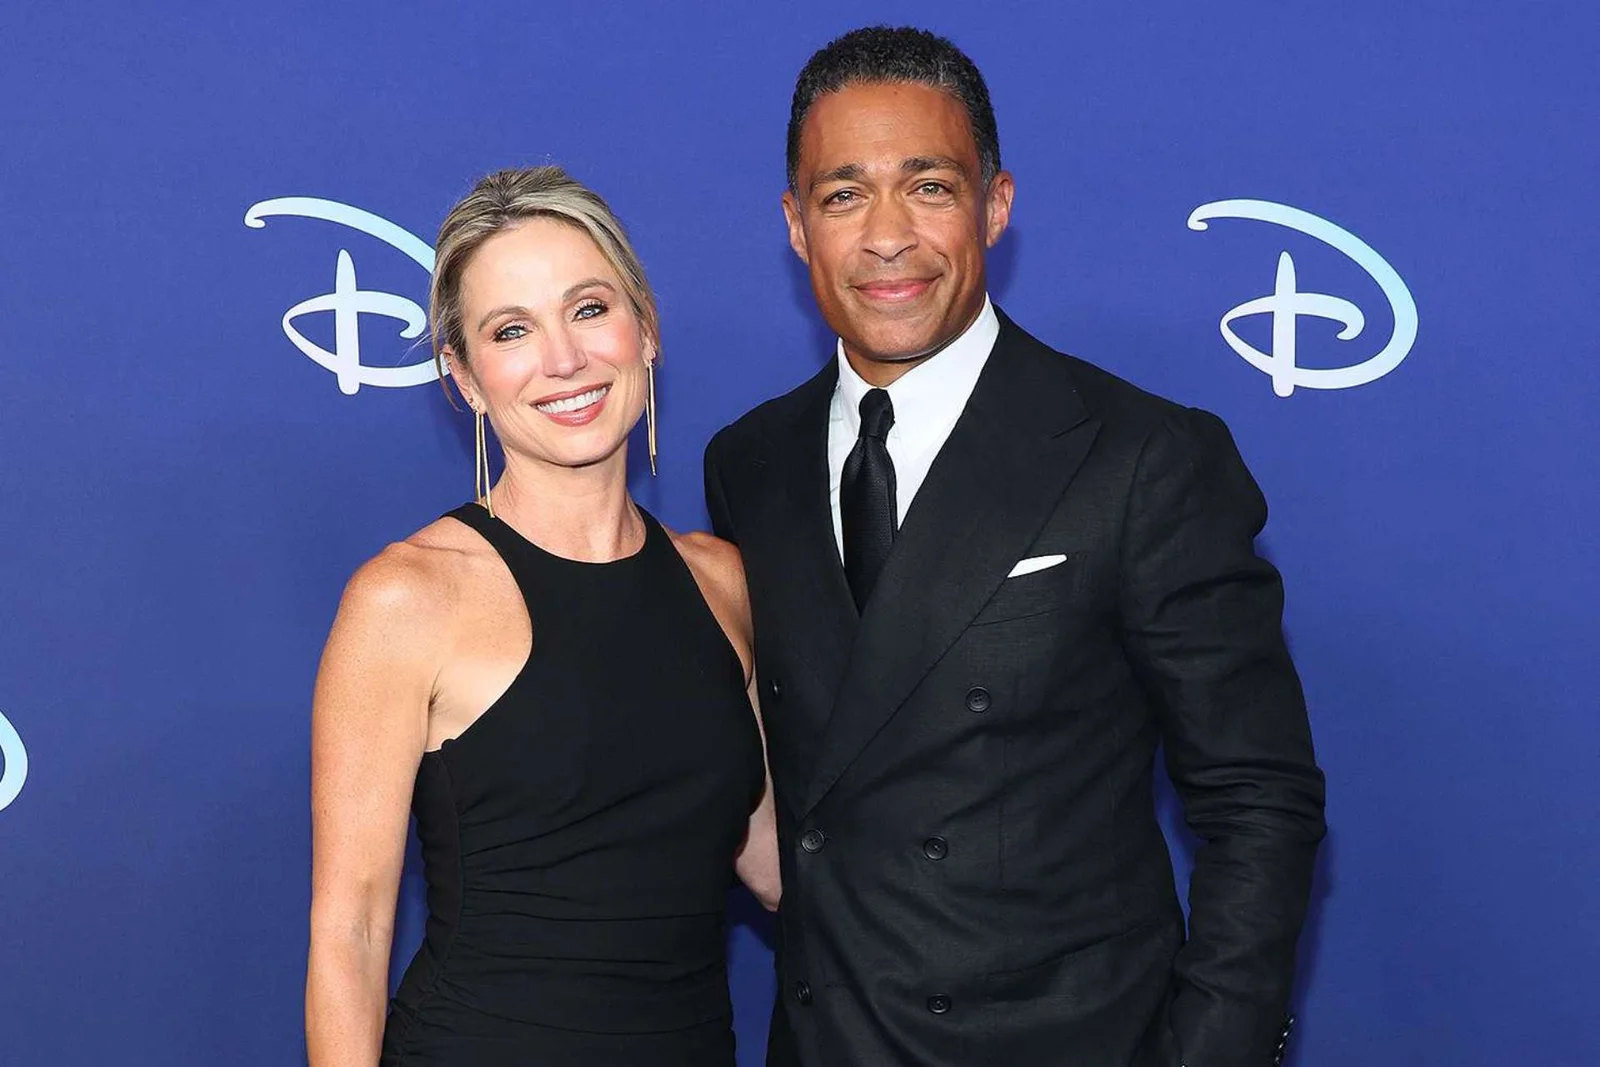 Former Good Morning America Co-Anchors, Amy Robach and T.J. Holmes, Express Emotions over Career Challenges